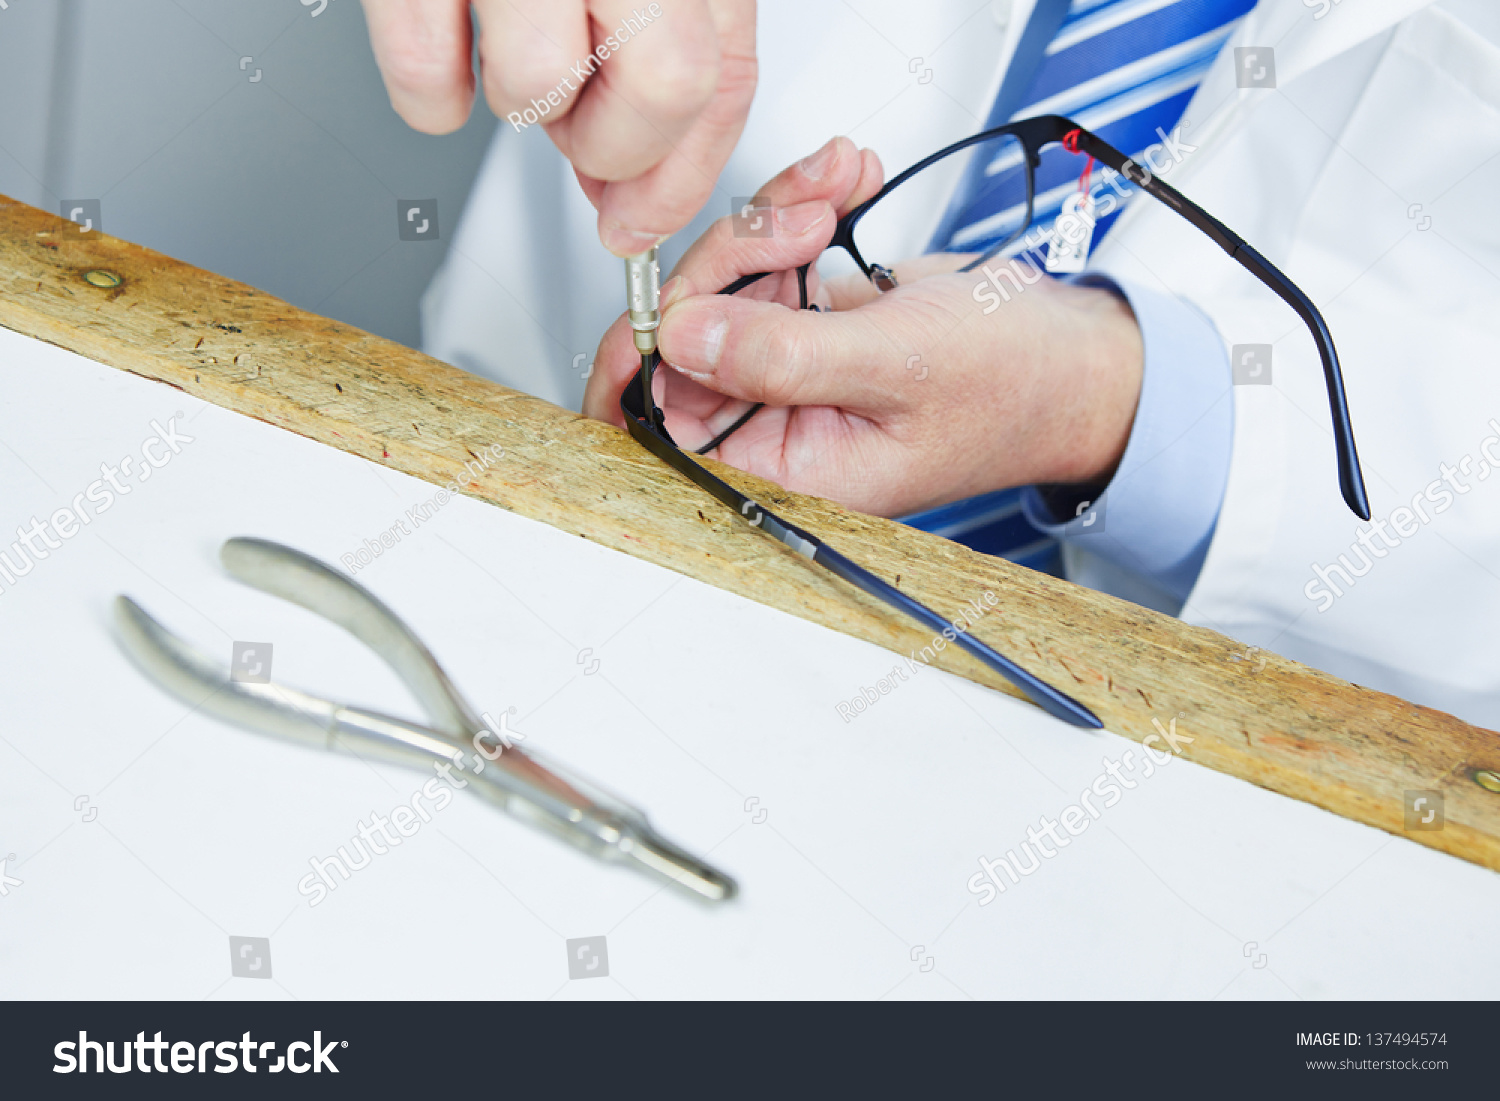 Optician fixing hinge of glasses with a screwdriver #137494574